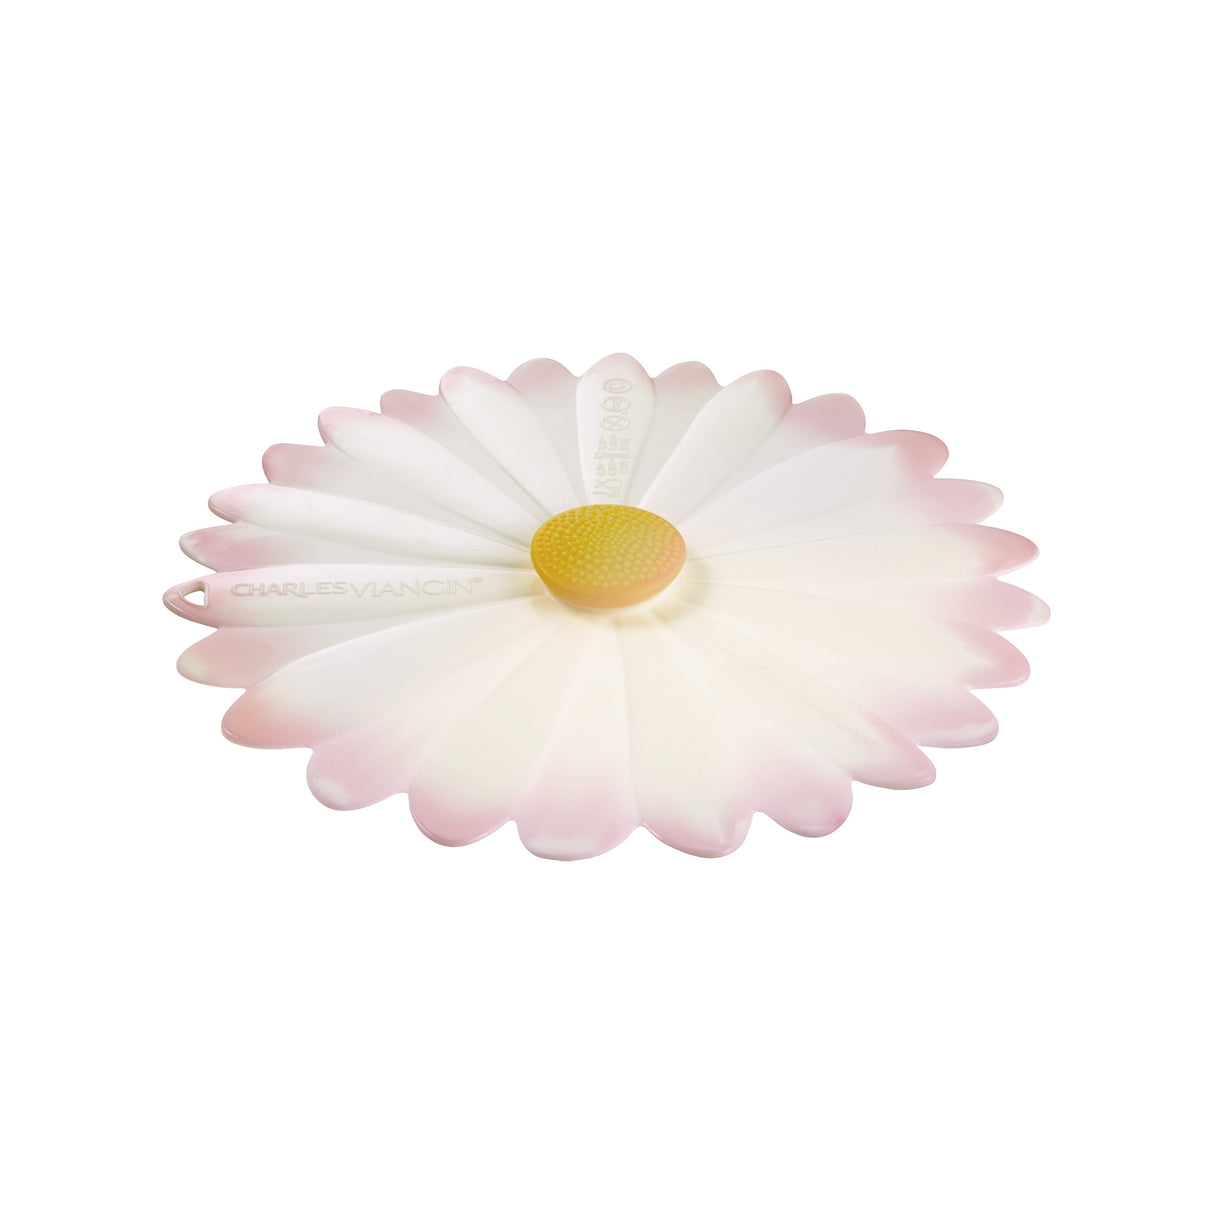 CHARLES-VIANCIN-2512-DAISY-LID-9-WHITE-PINK-SILICONE-3-4.jpg